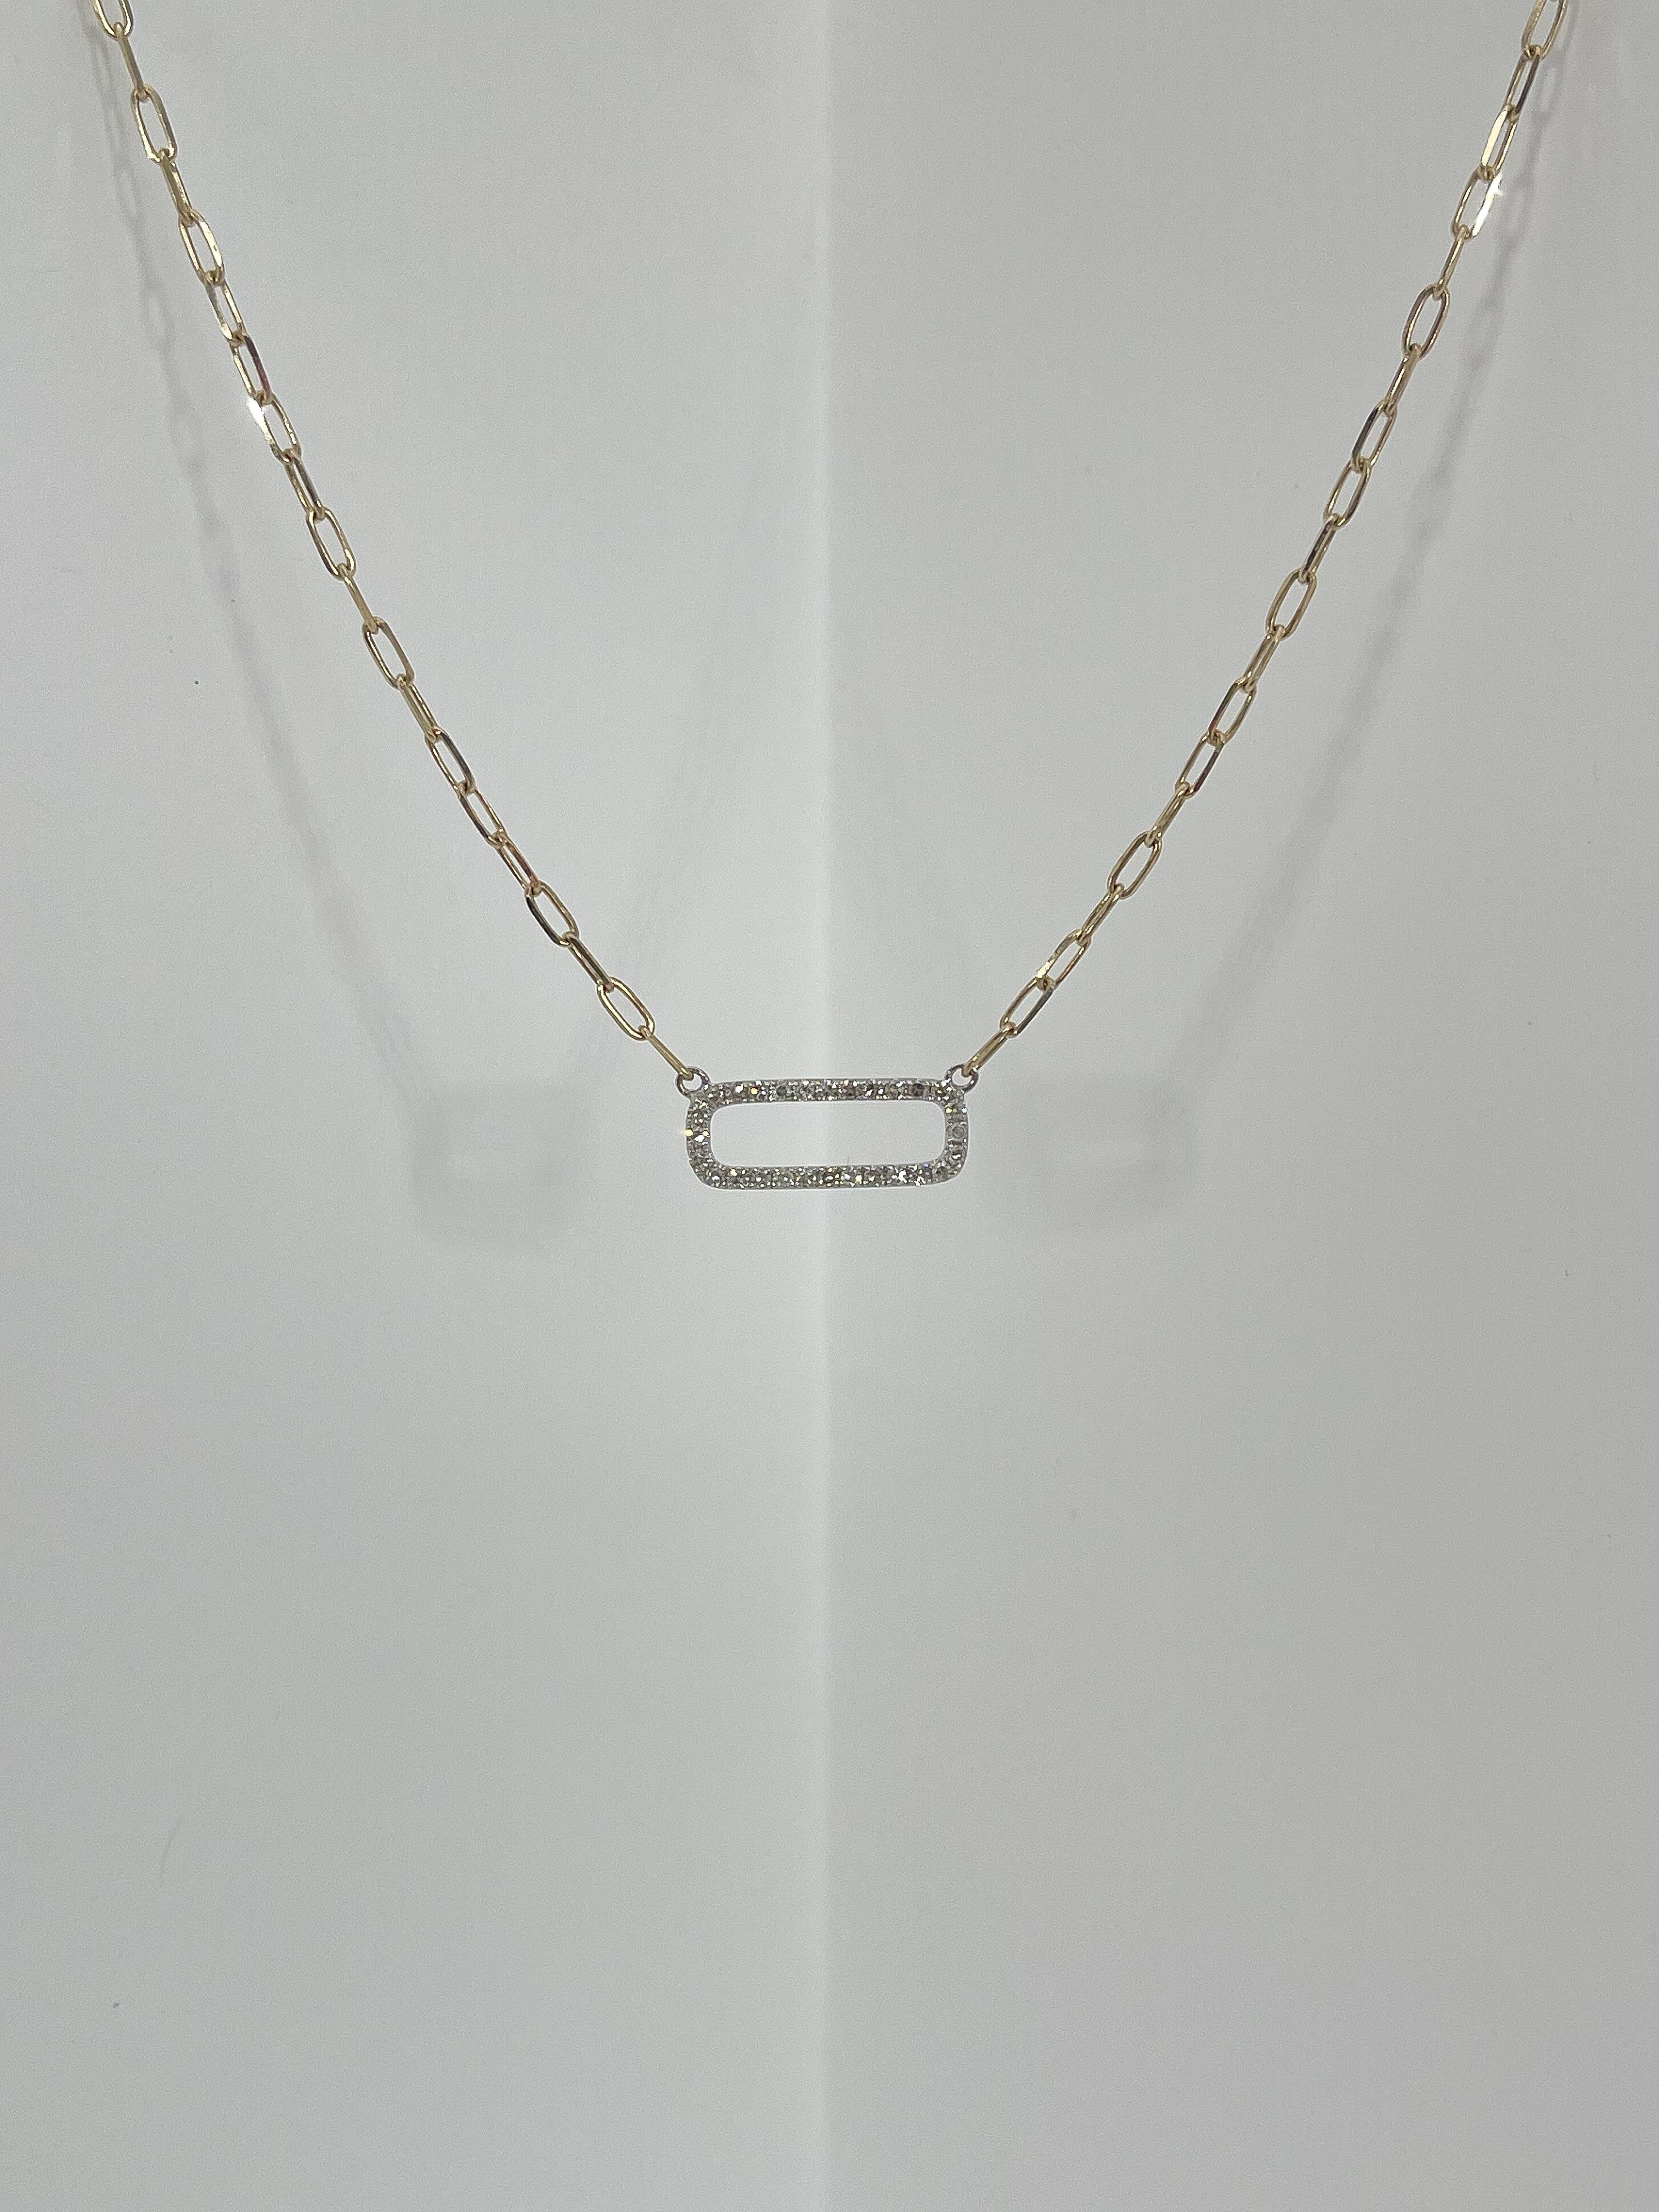 14k two toned .21 CTW diamond open square necklace. The diamonds in this necklace are all round, the chain is a paperclip chain and measures to be 18 inches long. the square measures to be 5.5mm x 16mm, has a lobster clasp to open and close, and the